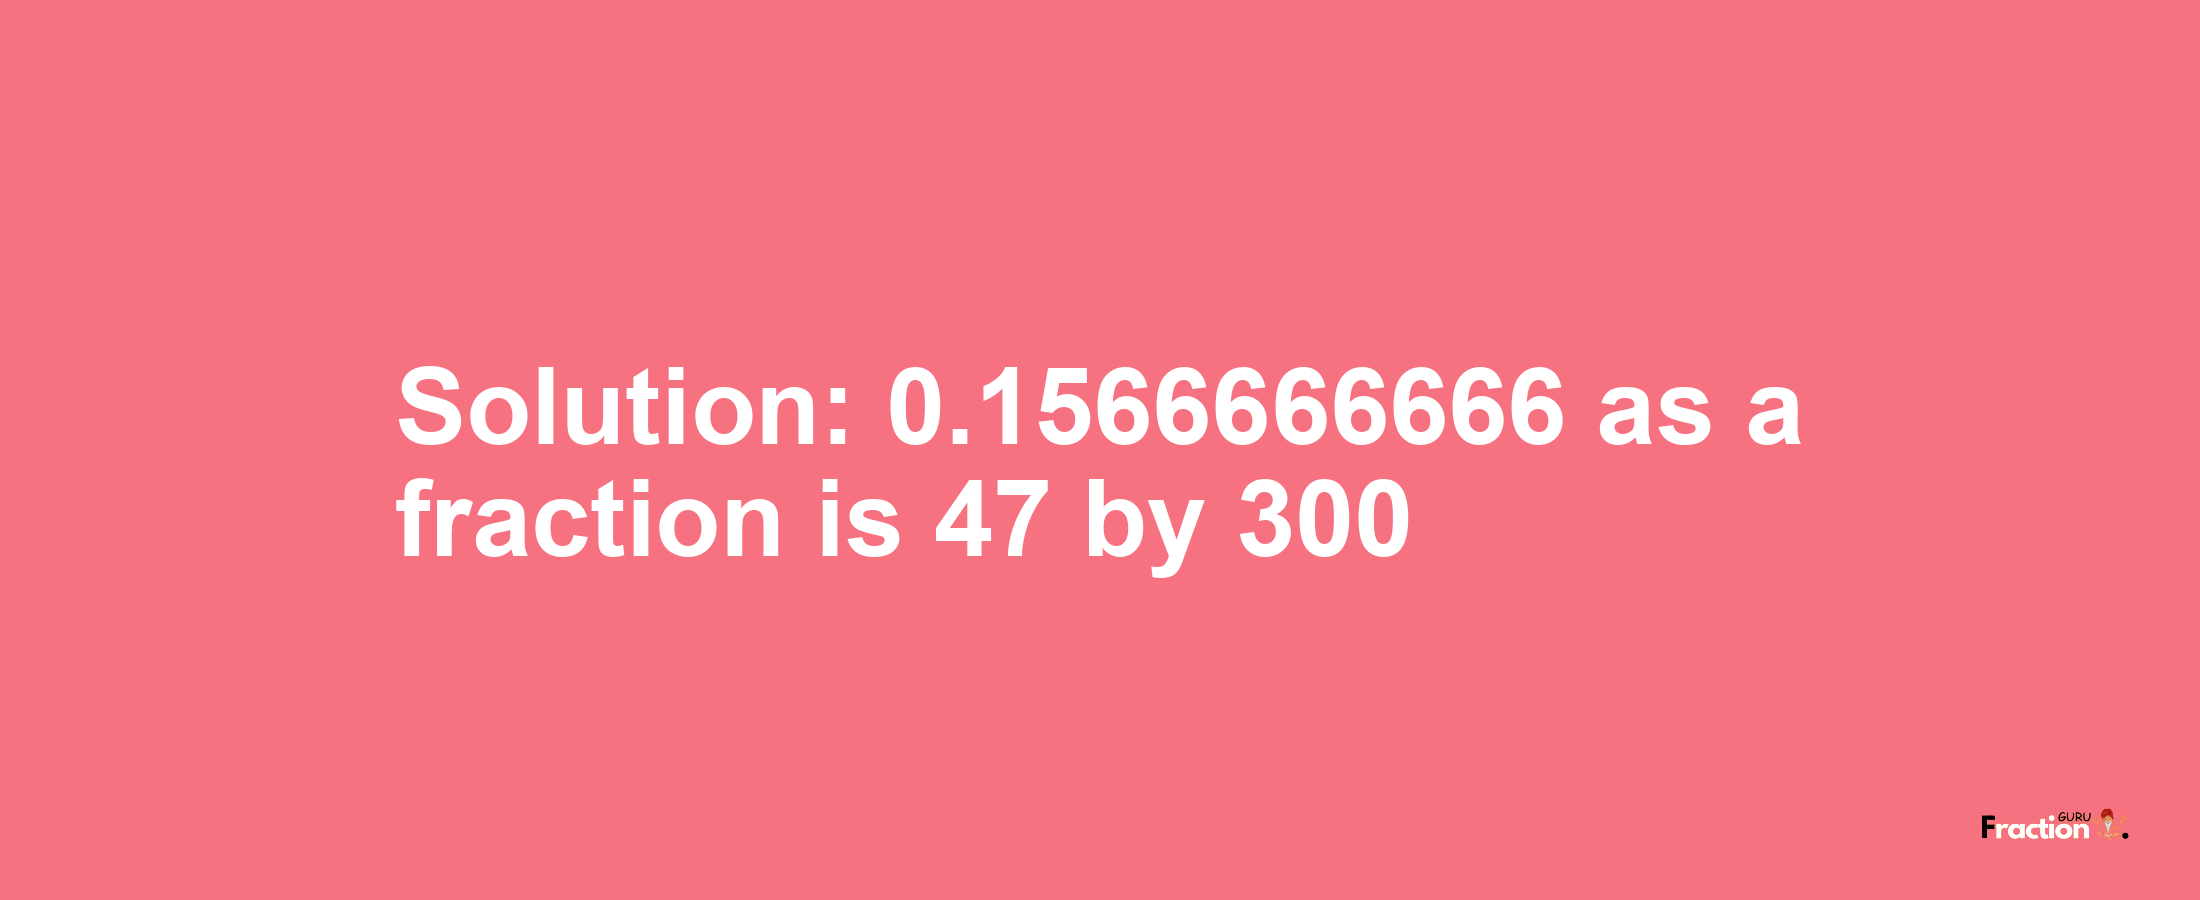 Solution:0.1566666666 as a fraction is 47/300